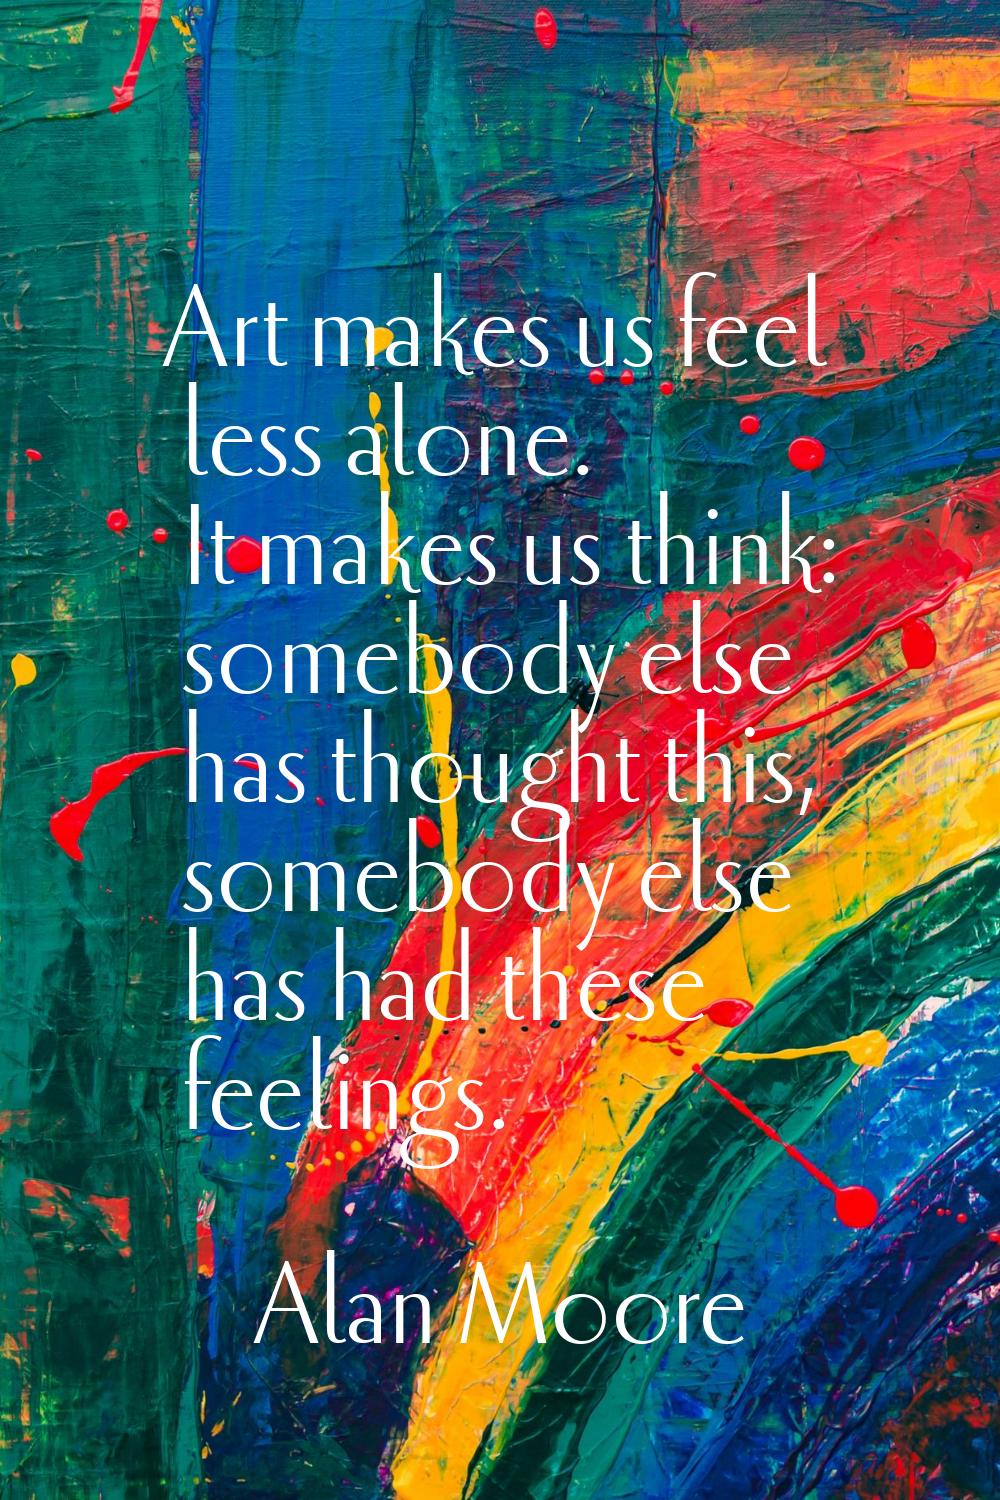 Art makes us feel less alone. It makes us think: somebody else has thought this, somebody else has 